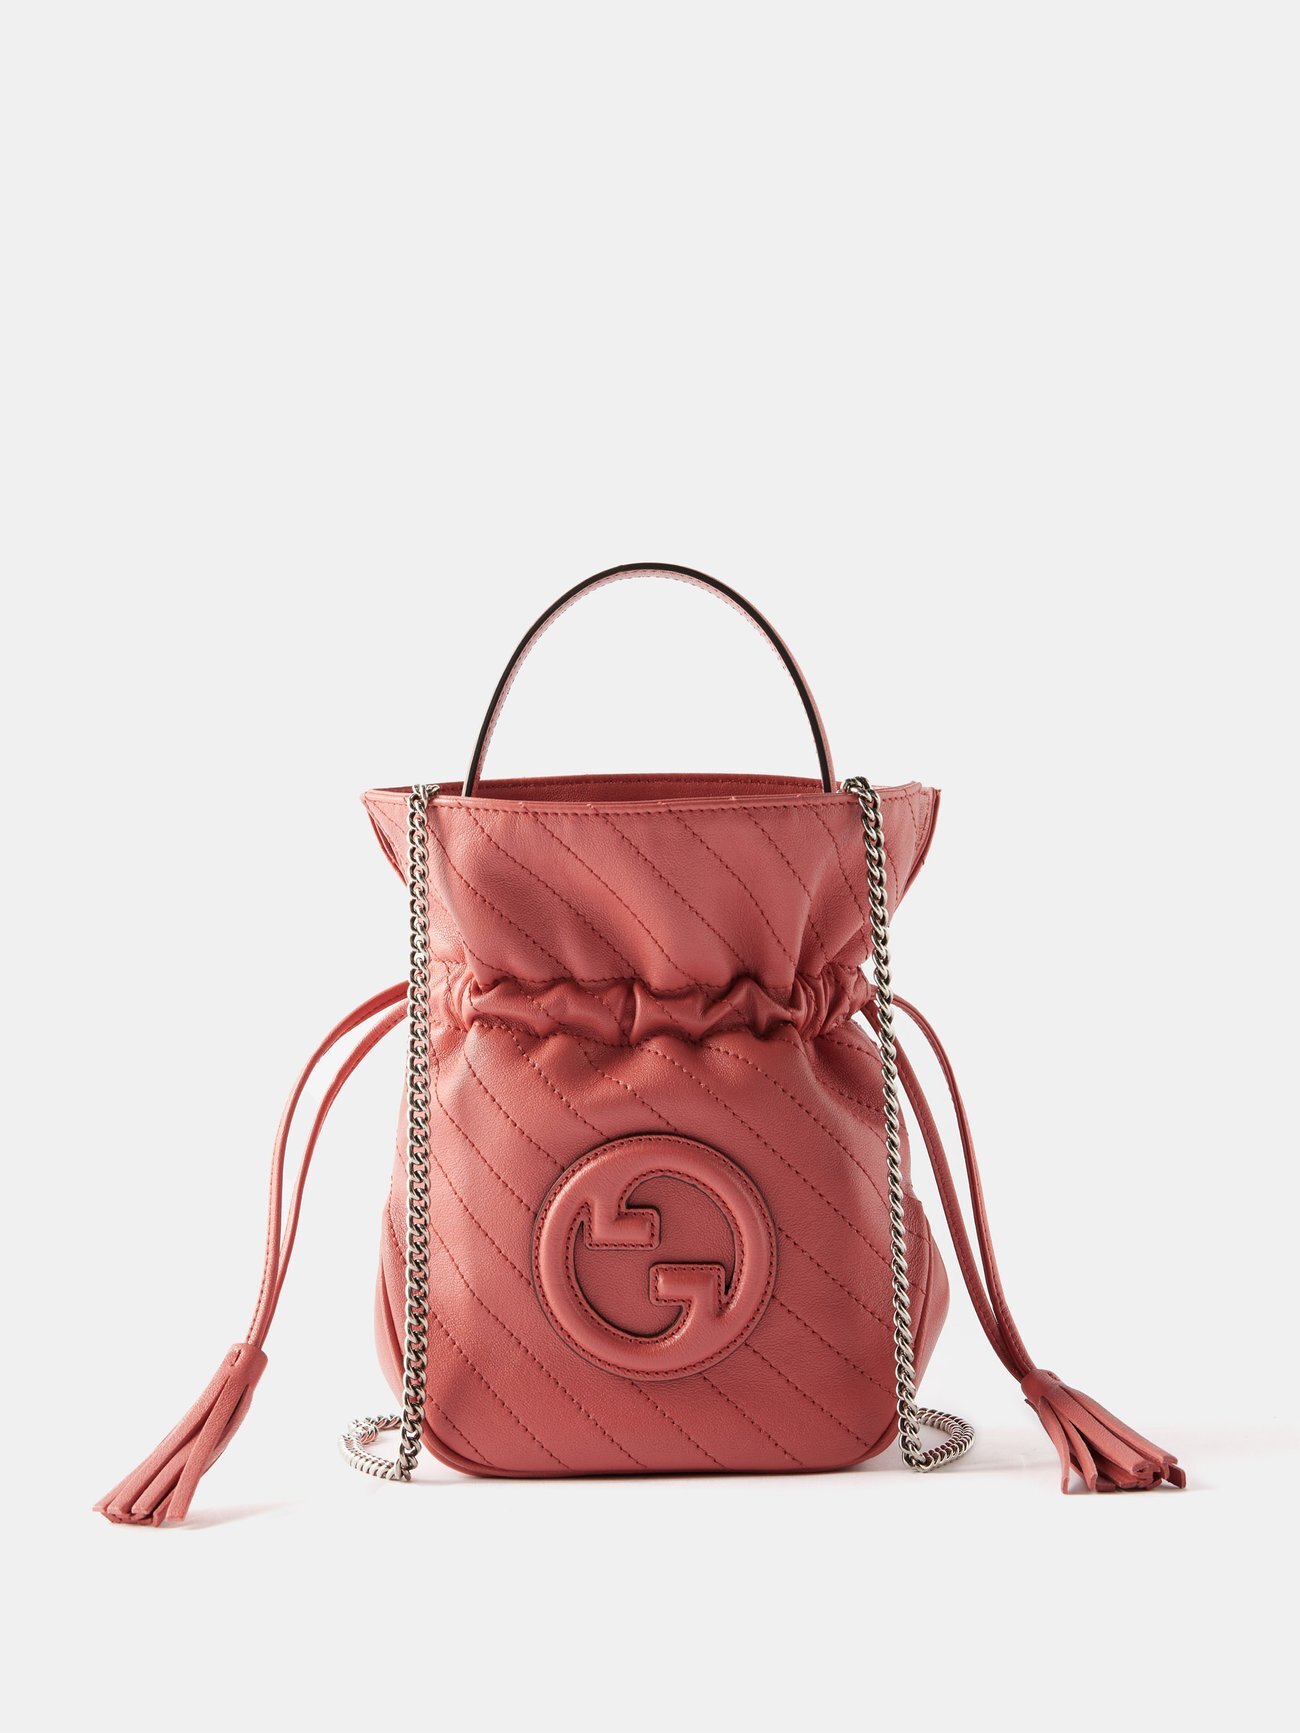 Gucci - Blondie Leather Bucket Bag - Womens - Pink